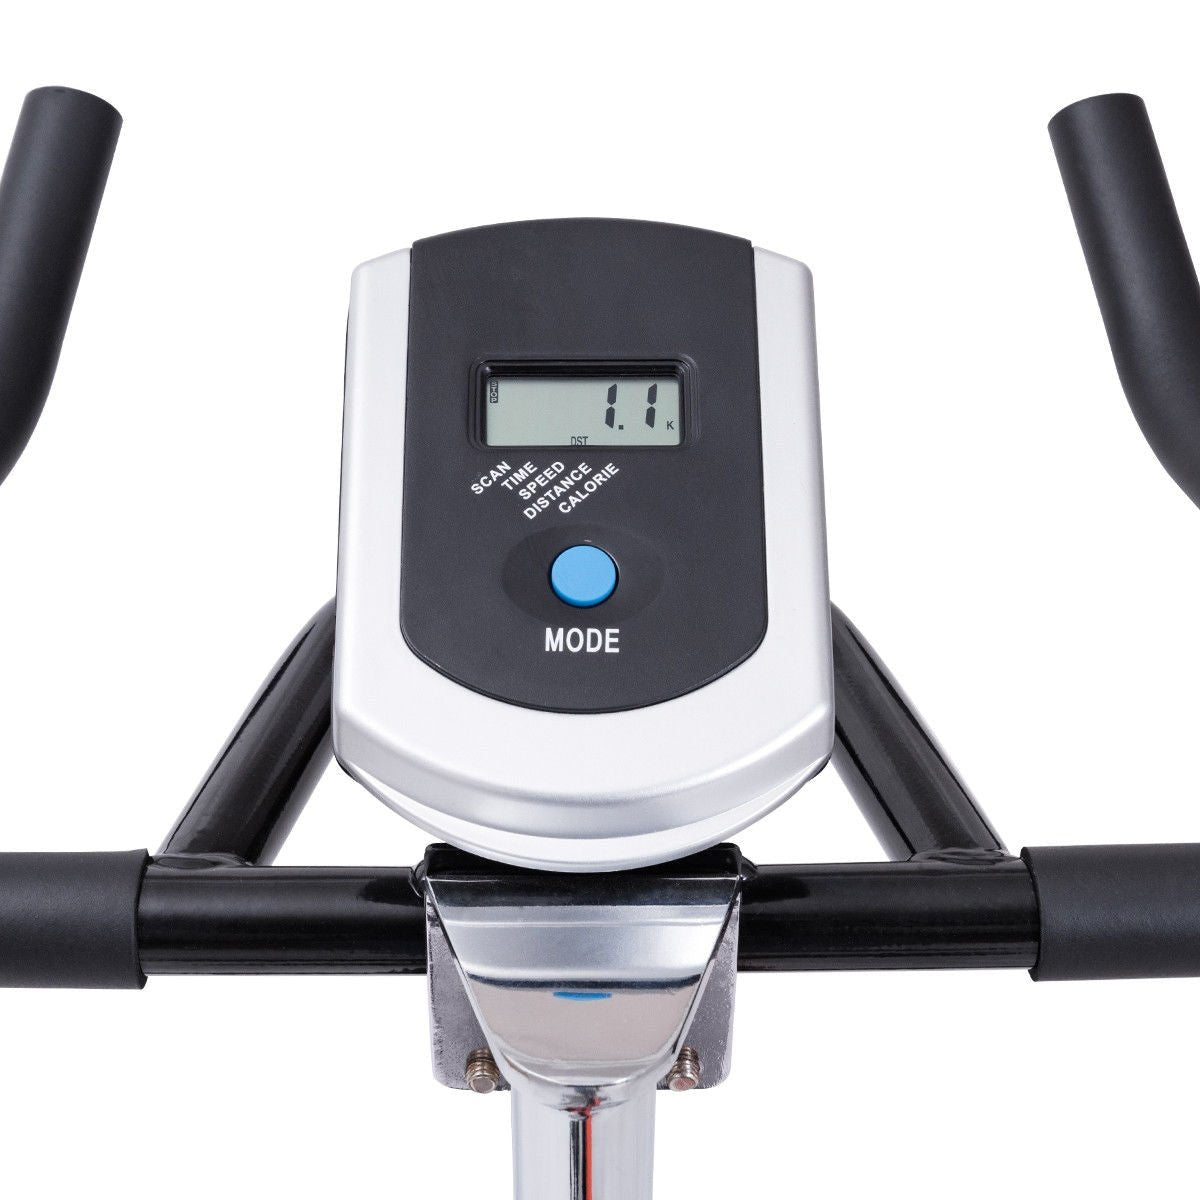 Indoor Fixed Aerobic Fitness Exercise Bicycle with Flywheel and LCD Display at Gallery Canada